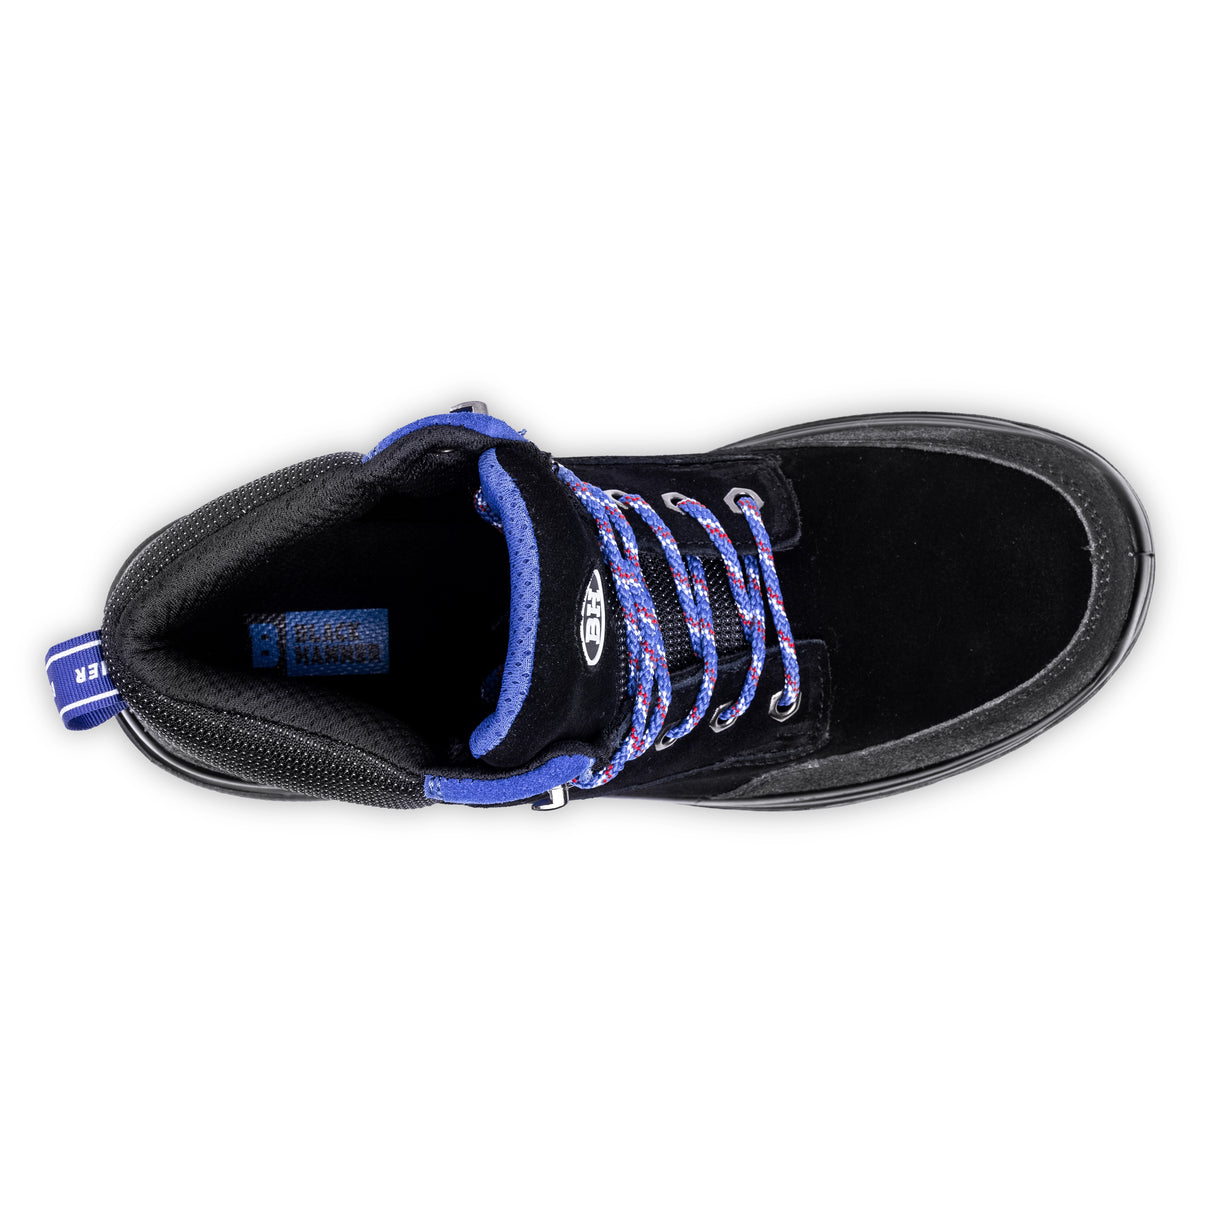 Lace-Up closure type footwear